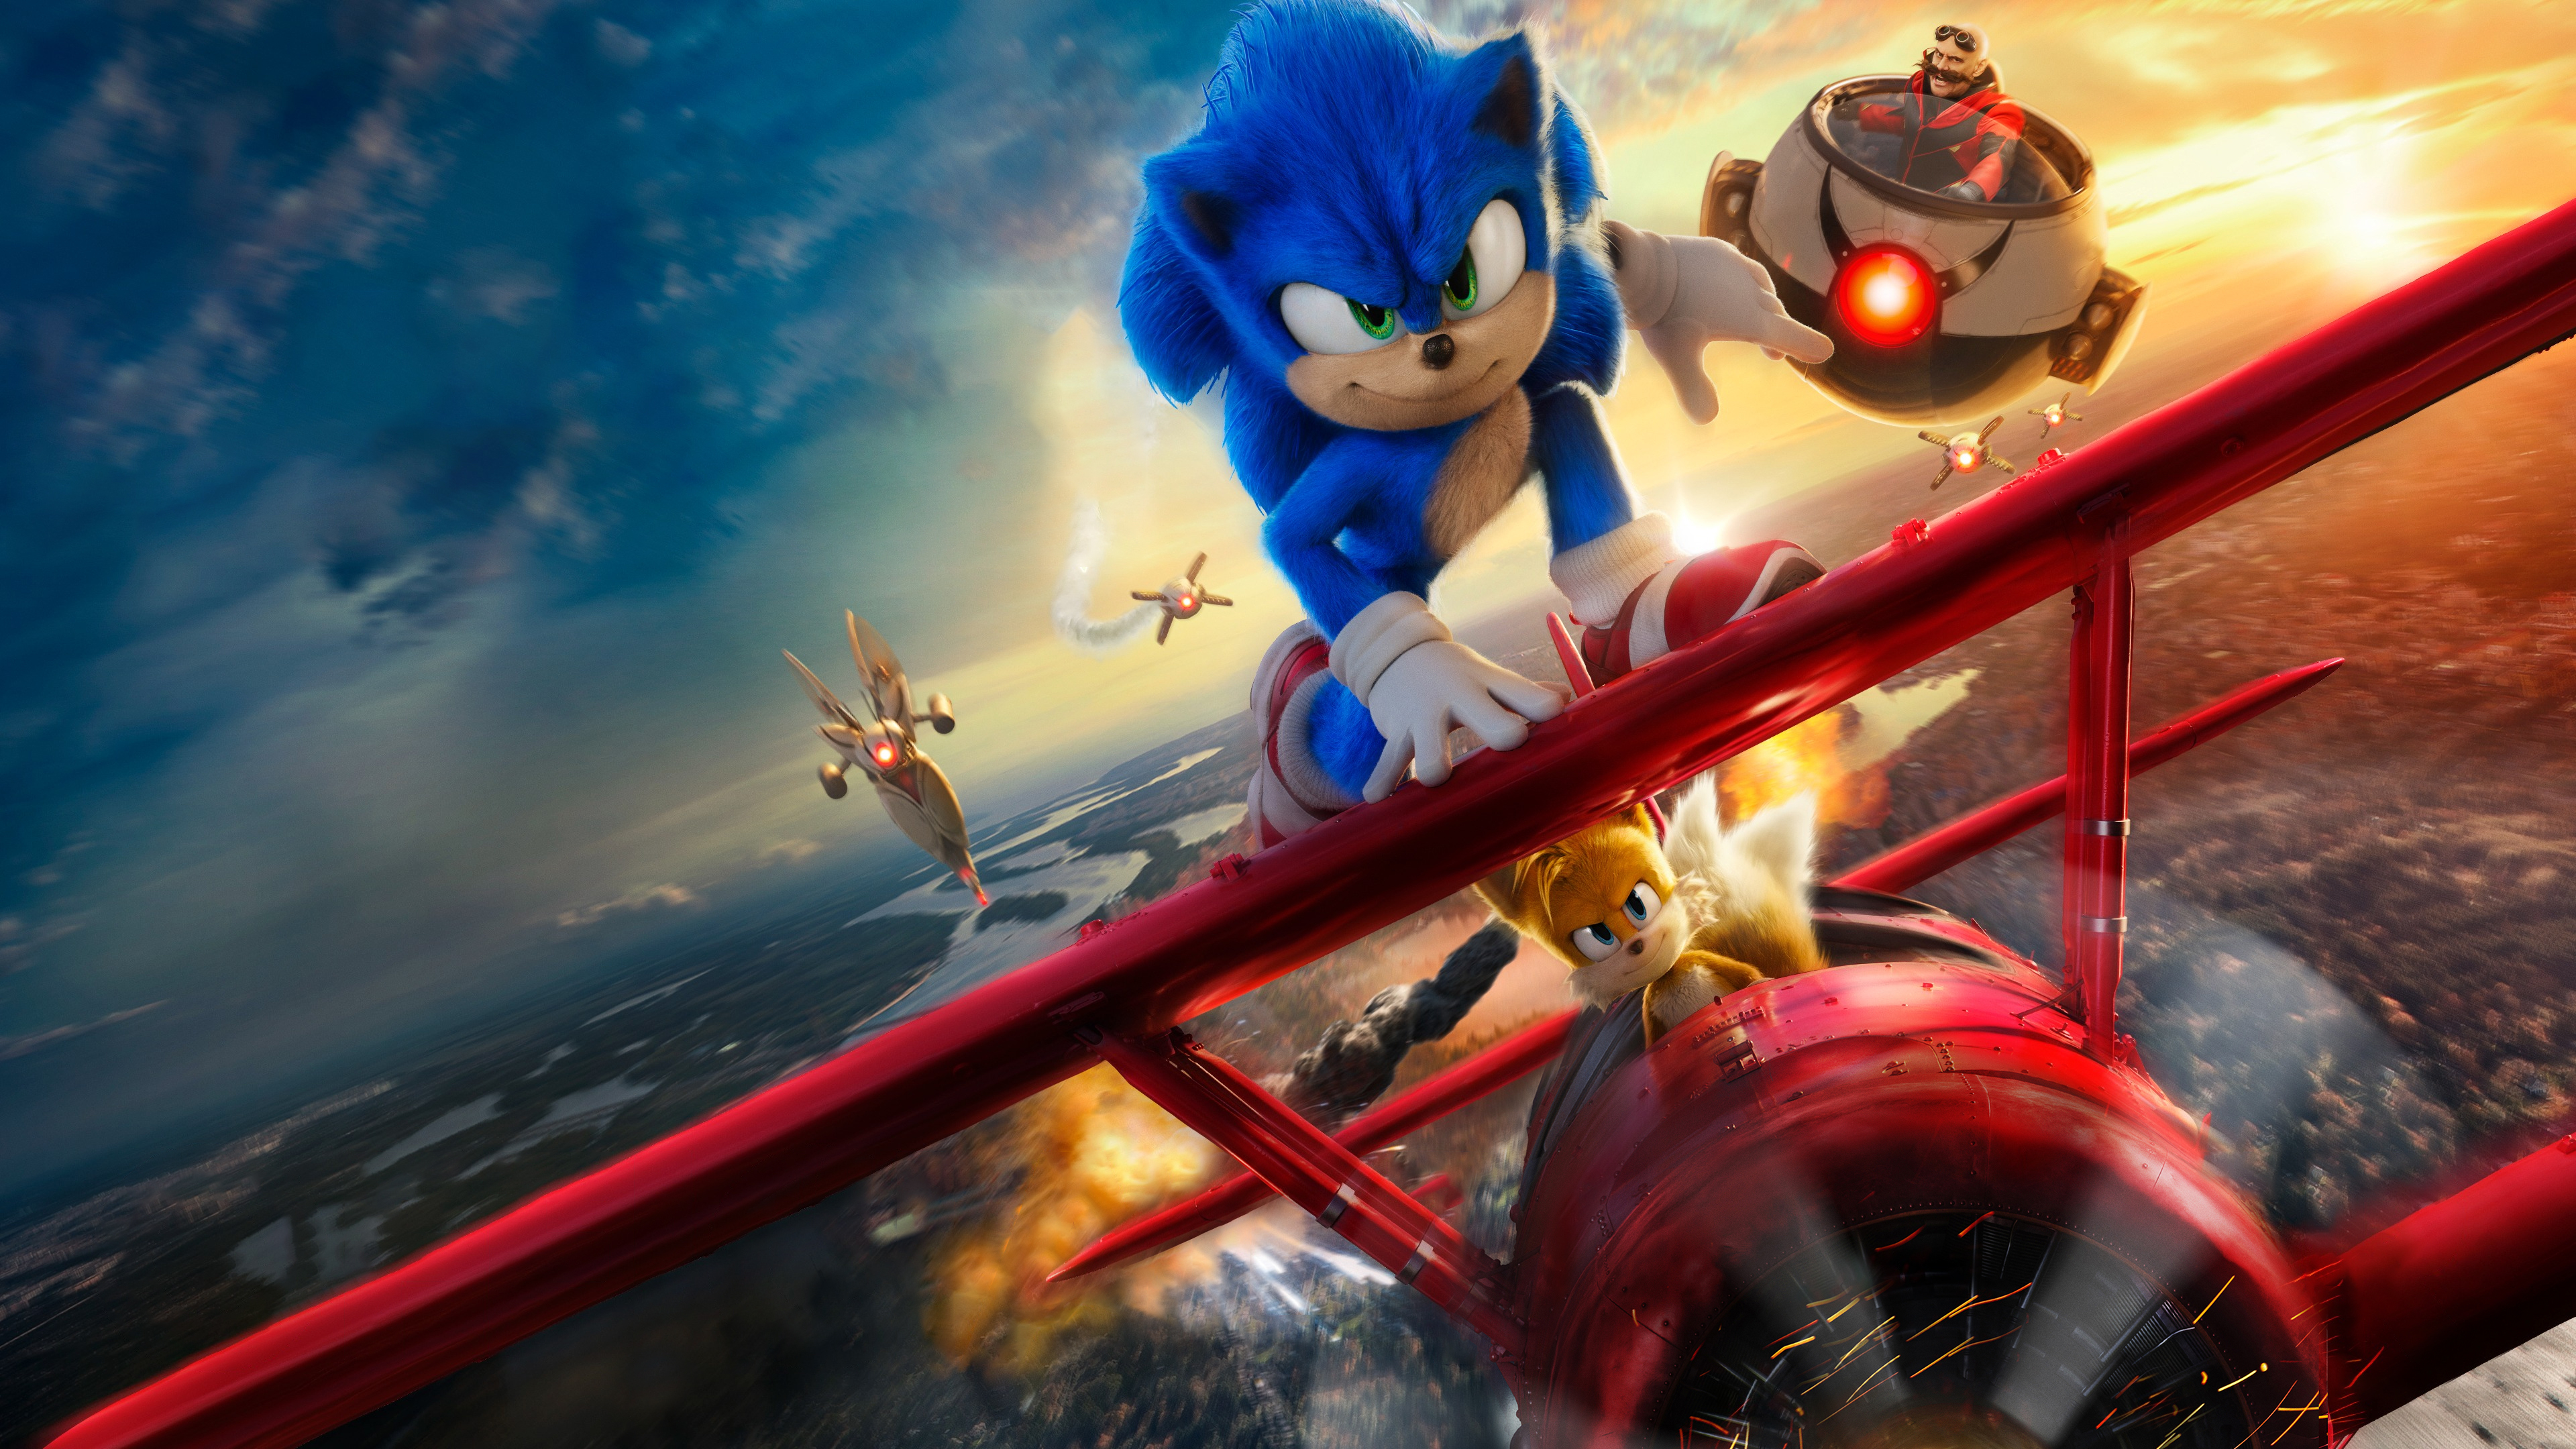 3840x2160 30+ Sonic the Hedgehog 2 HD Wallpapers and Backgrounds